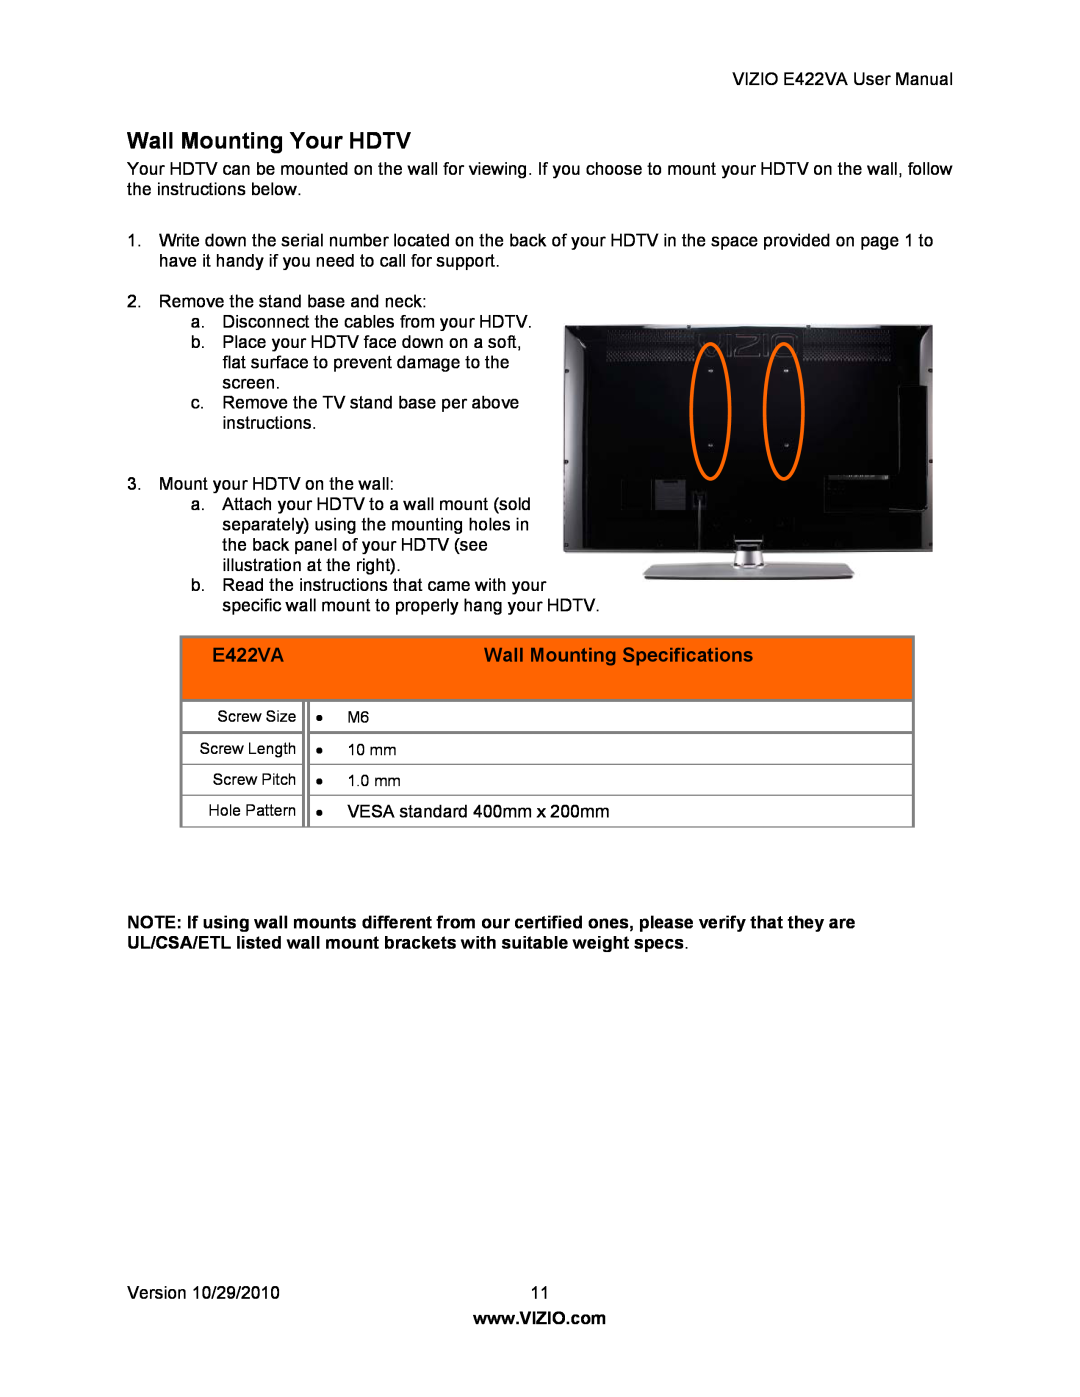 Xerox E422VA user manual Wall Mounting Your HDTV, Wall Mounting Specifications 